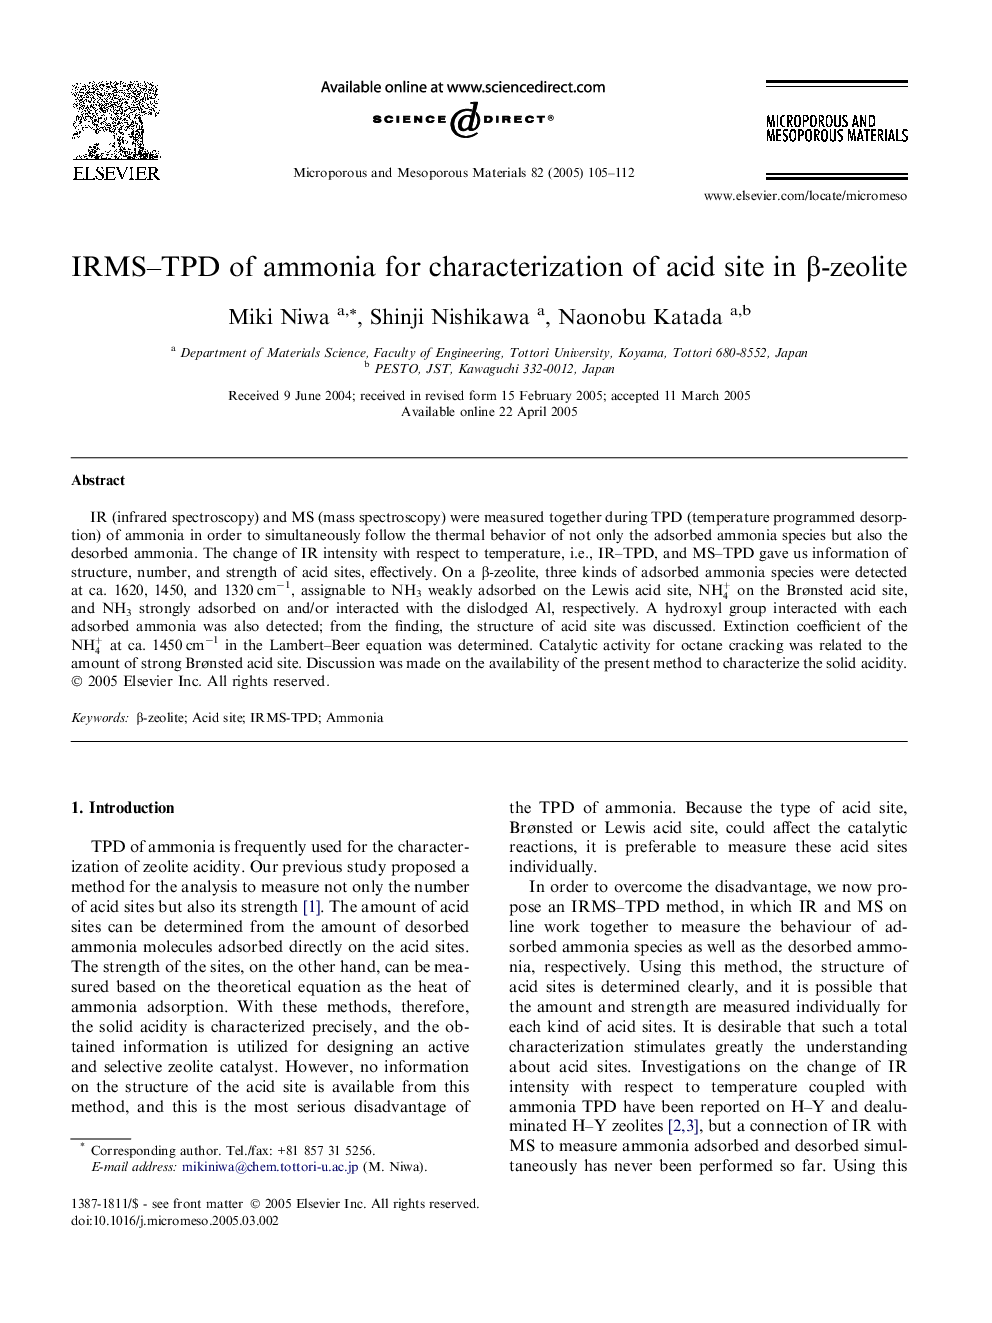 IRMS-TPD of ammonia for characterization of acid site in Î²-zeolite